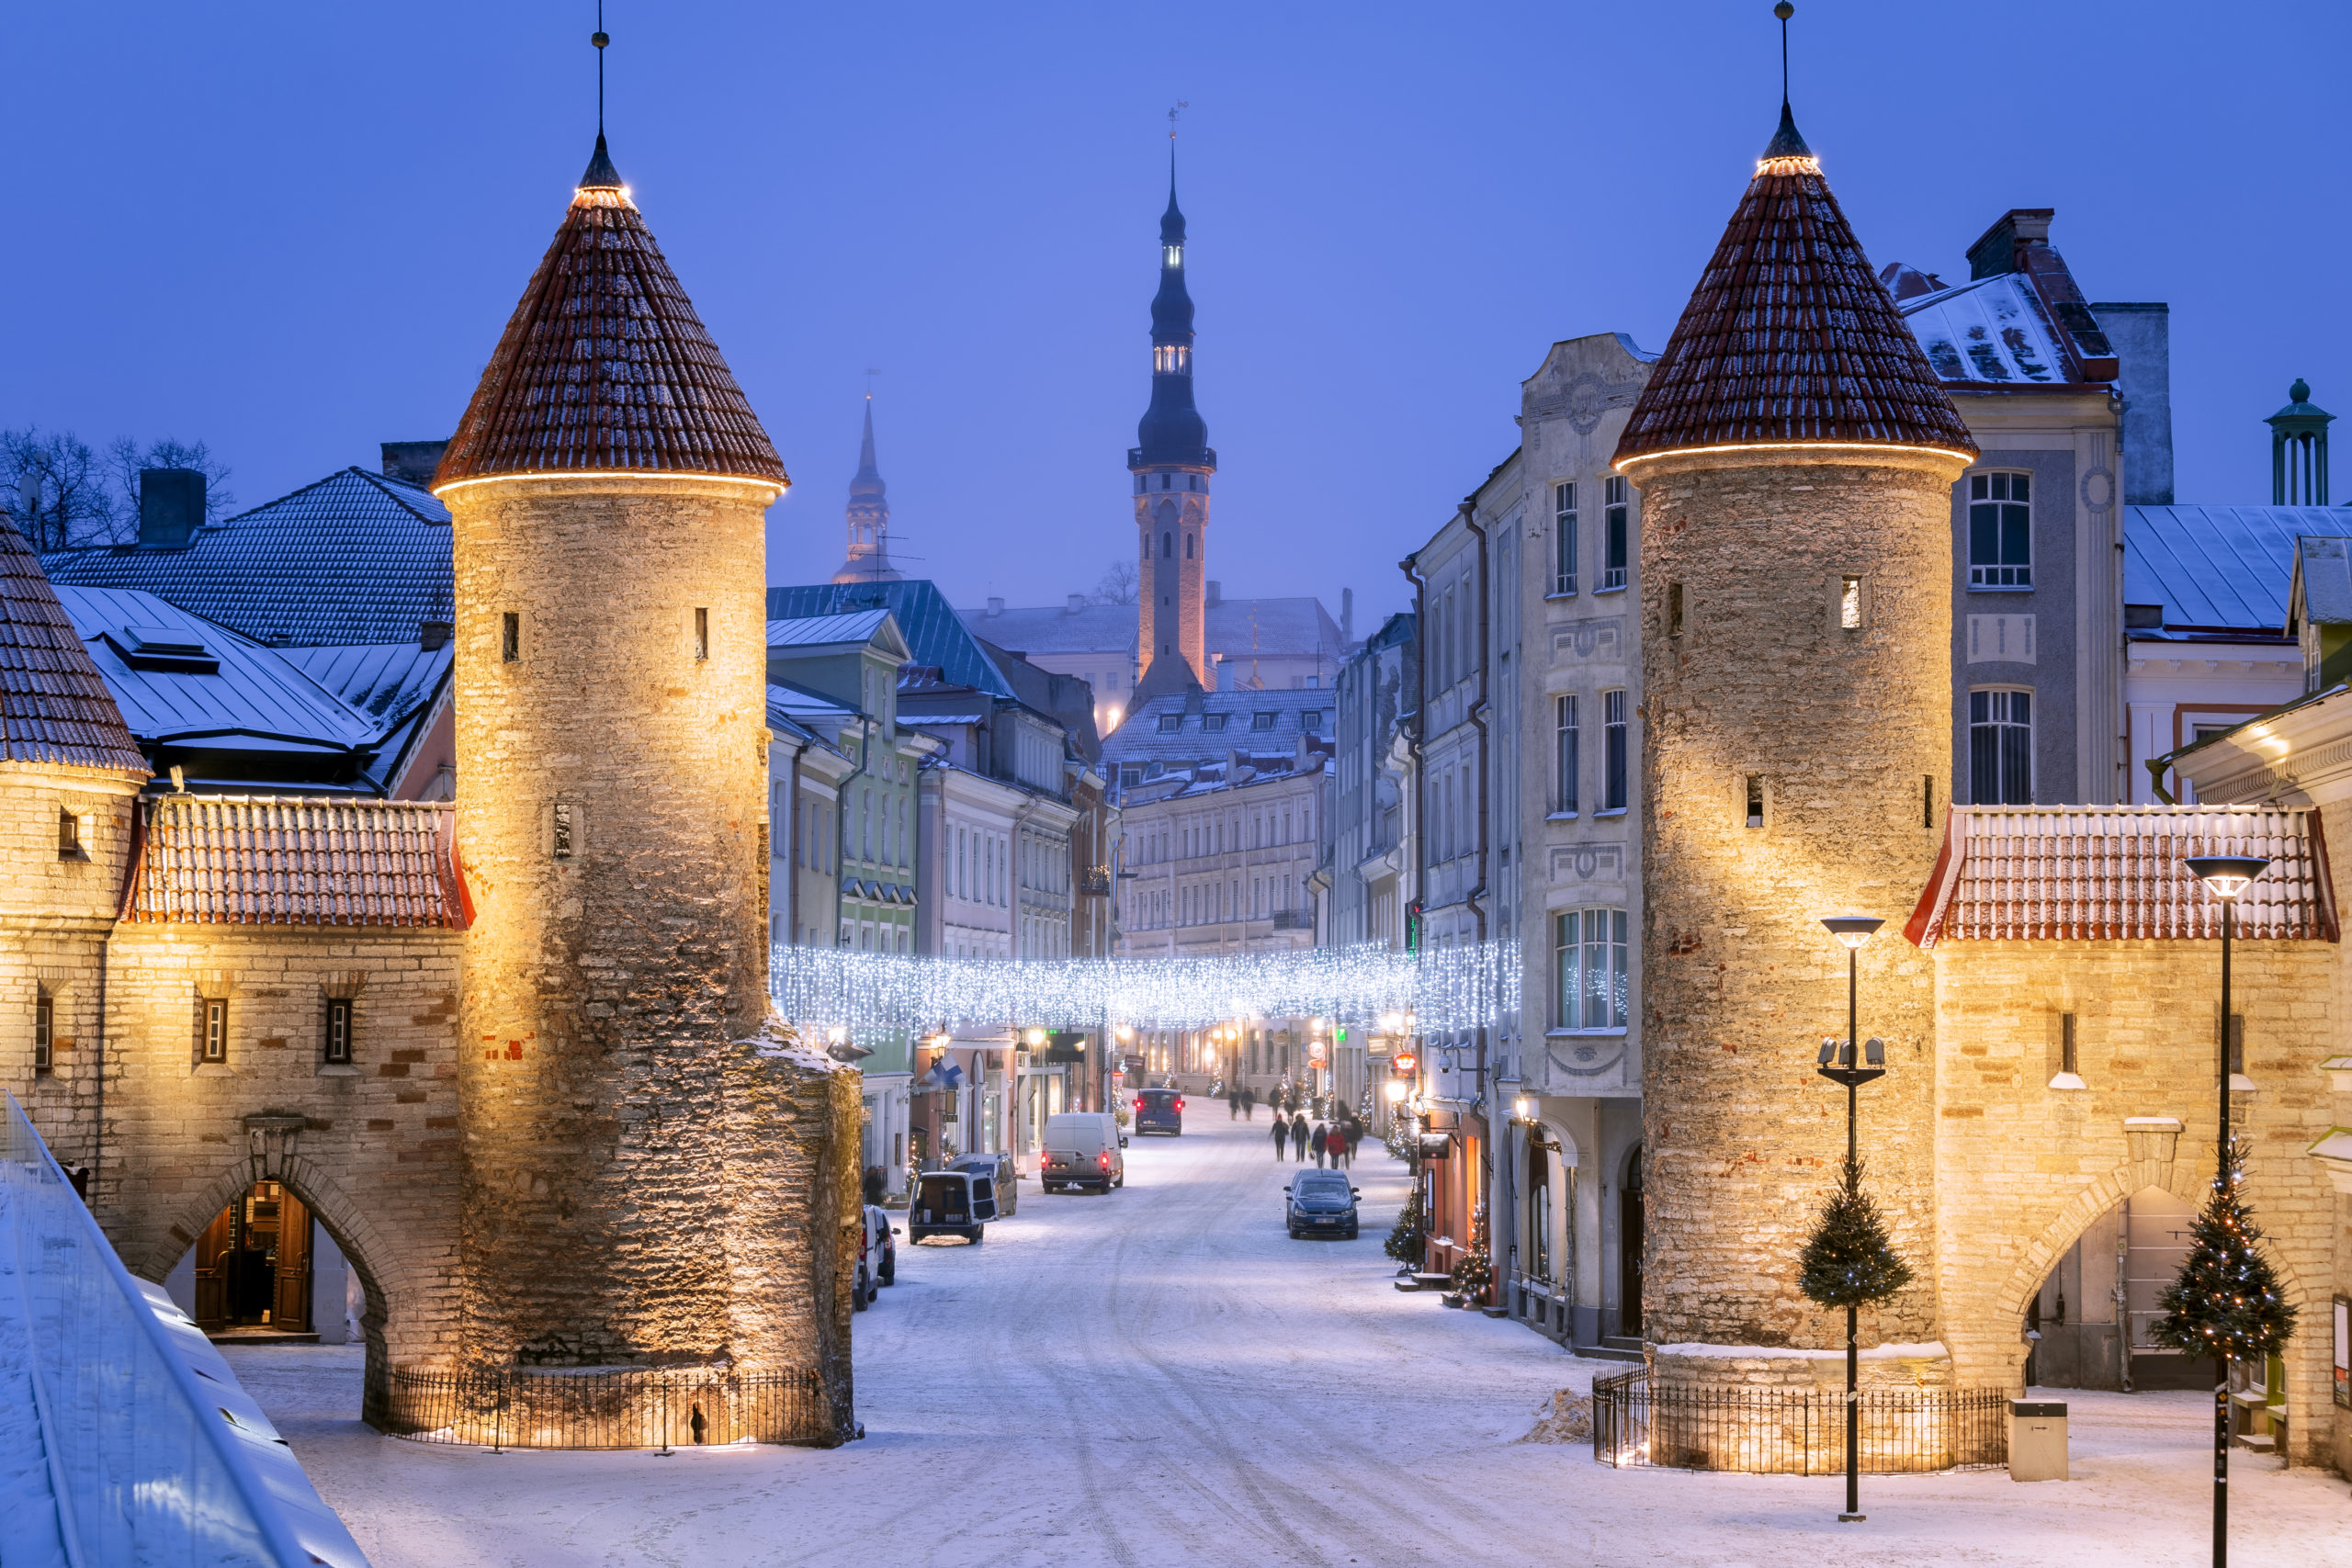 Lessons From Estonia: A Window Into E-Societies of the Future